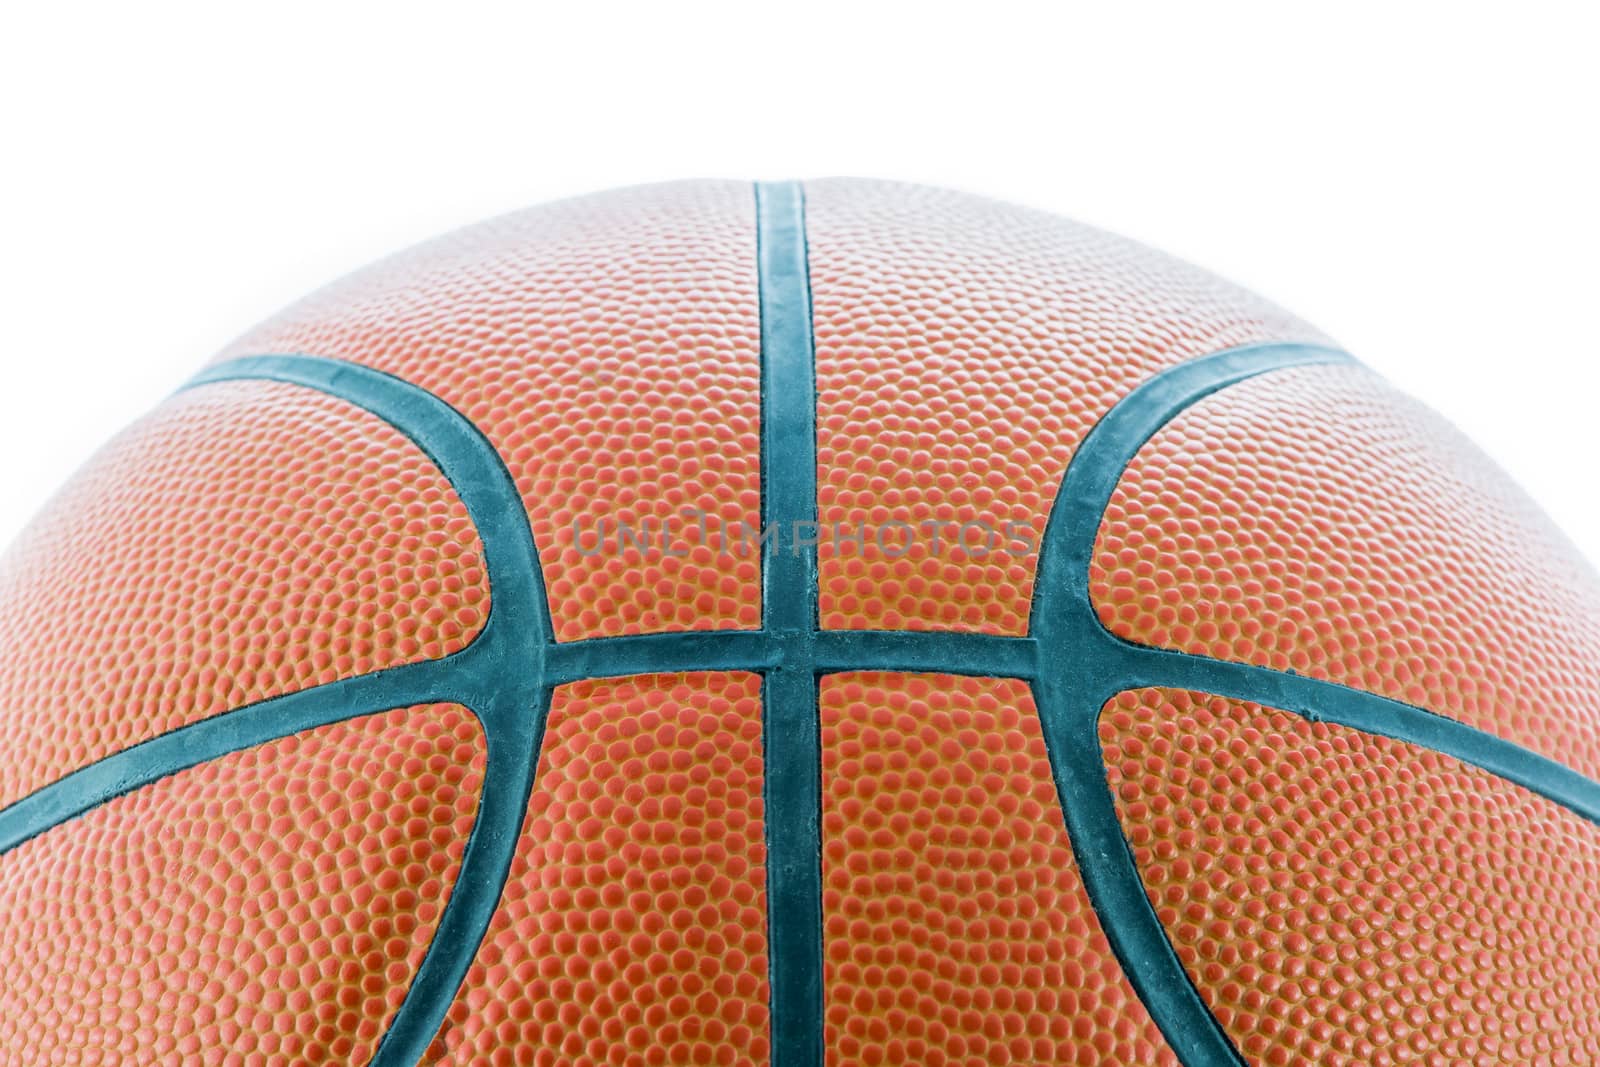 Closeup Basketball or Basket Ball isolate on white background